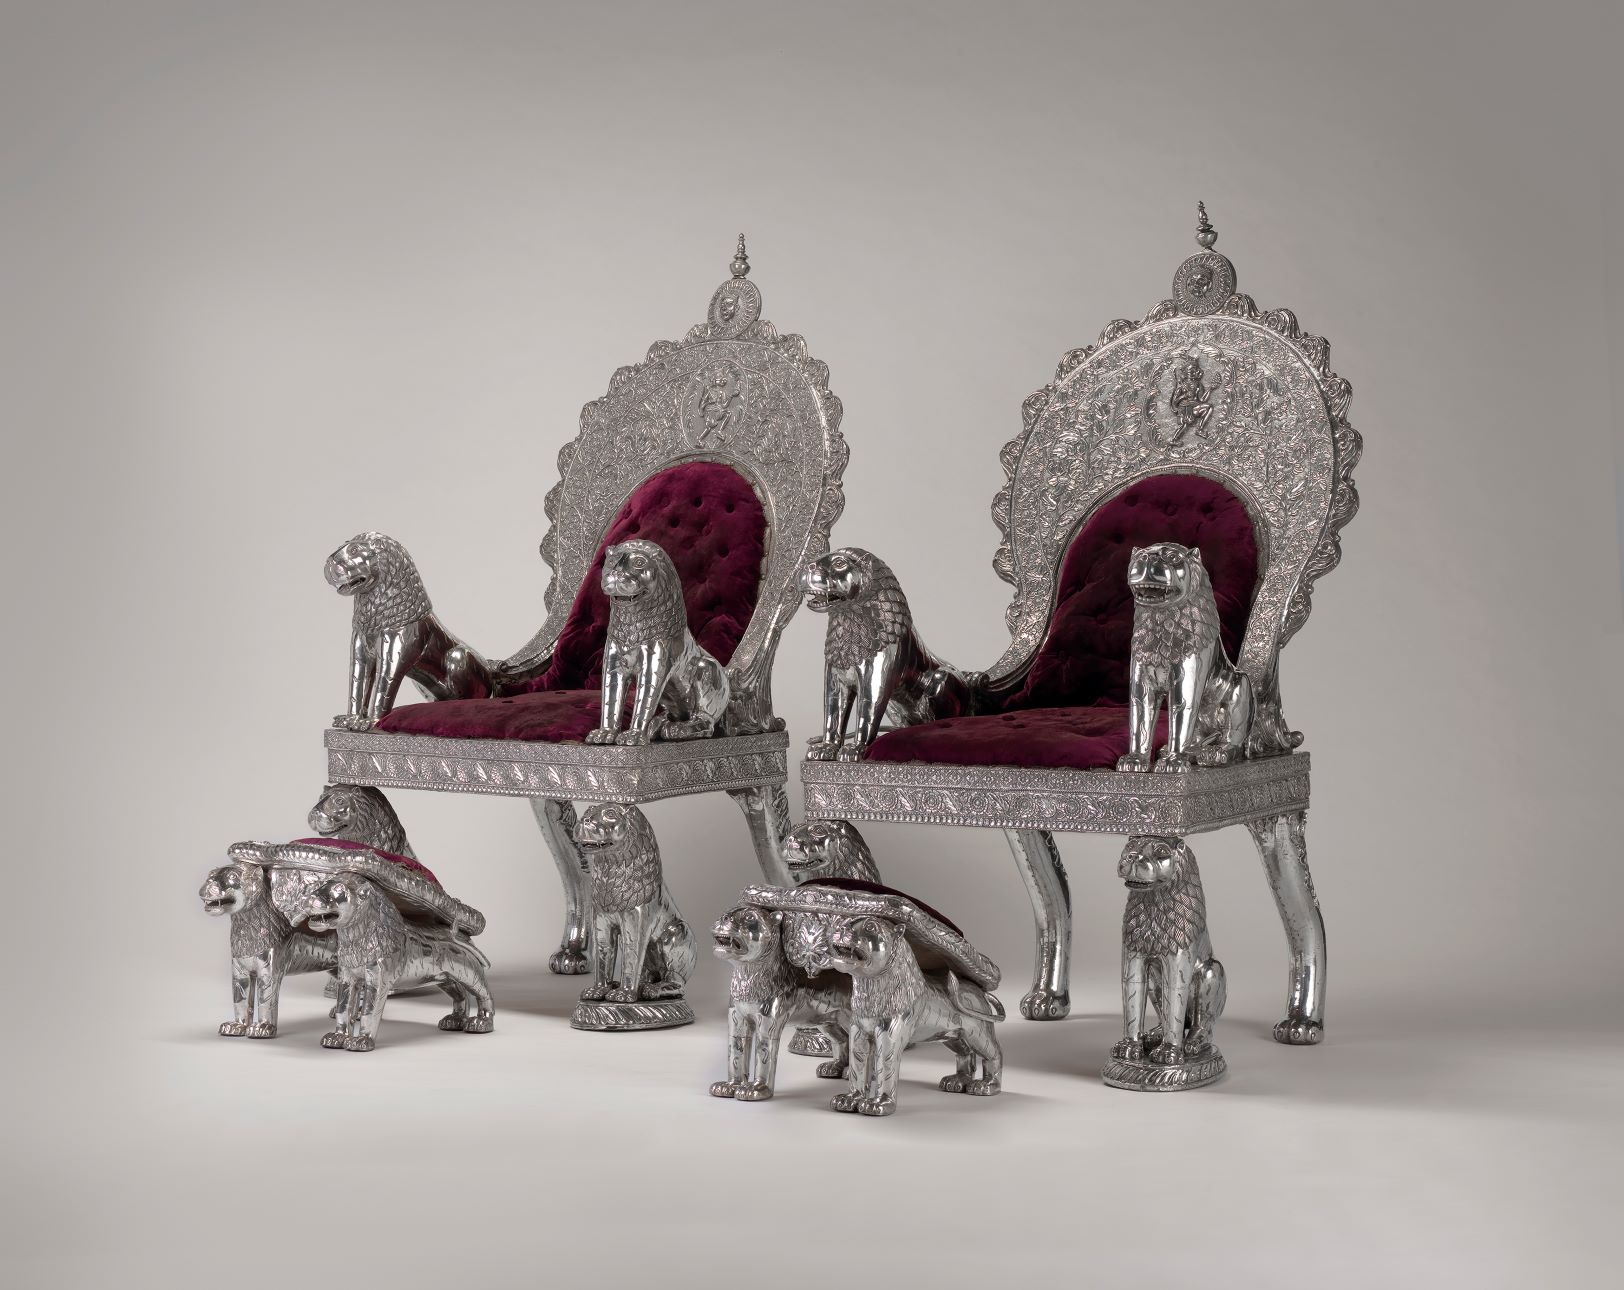 Image credit: Royal Throne, 1911. Molded and carved silver sheet, wrapped around a wood core, with silk velvet, brocaded silk and horse or ox tail. 59 1/16 by 31 1/2 by 35 7/16in(150 by 80 by 90 cm). Purchase: William Rockhill Nelson Trust through the George H. and Elizabeth O. Davis Fund. 2013.10.2.1 